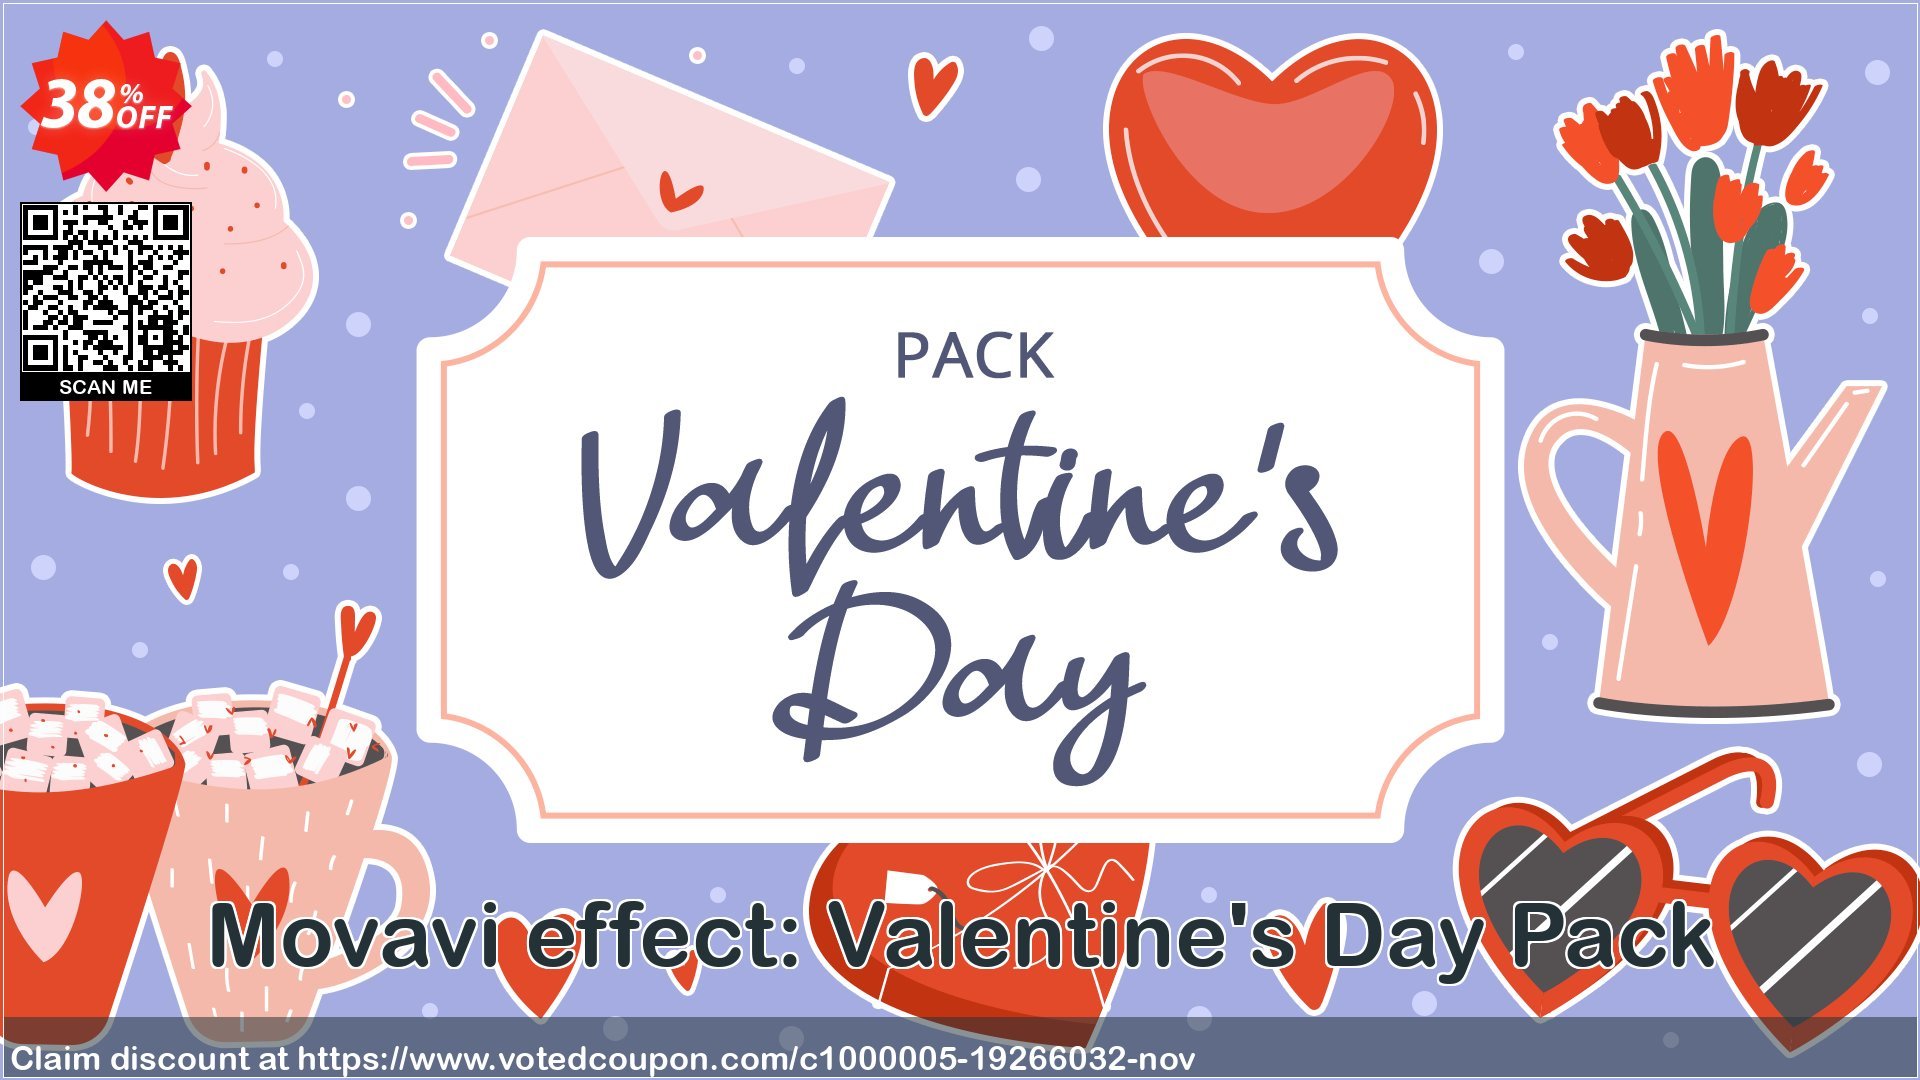 Movavi effect: Valentine's Day Pack Coupon Code Apr 2024, 38% OFF - VotedCoupon